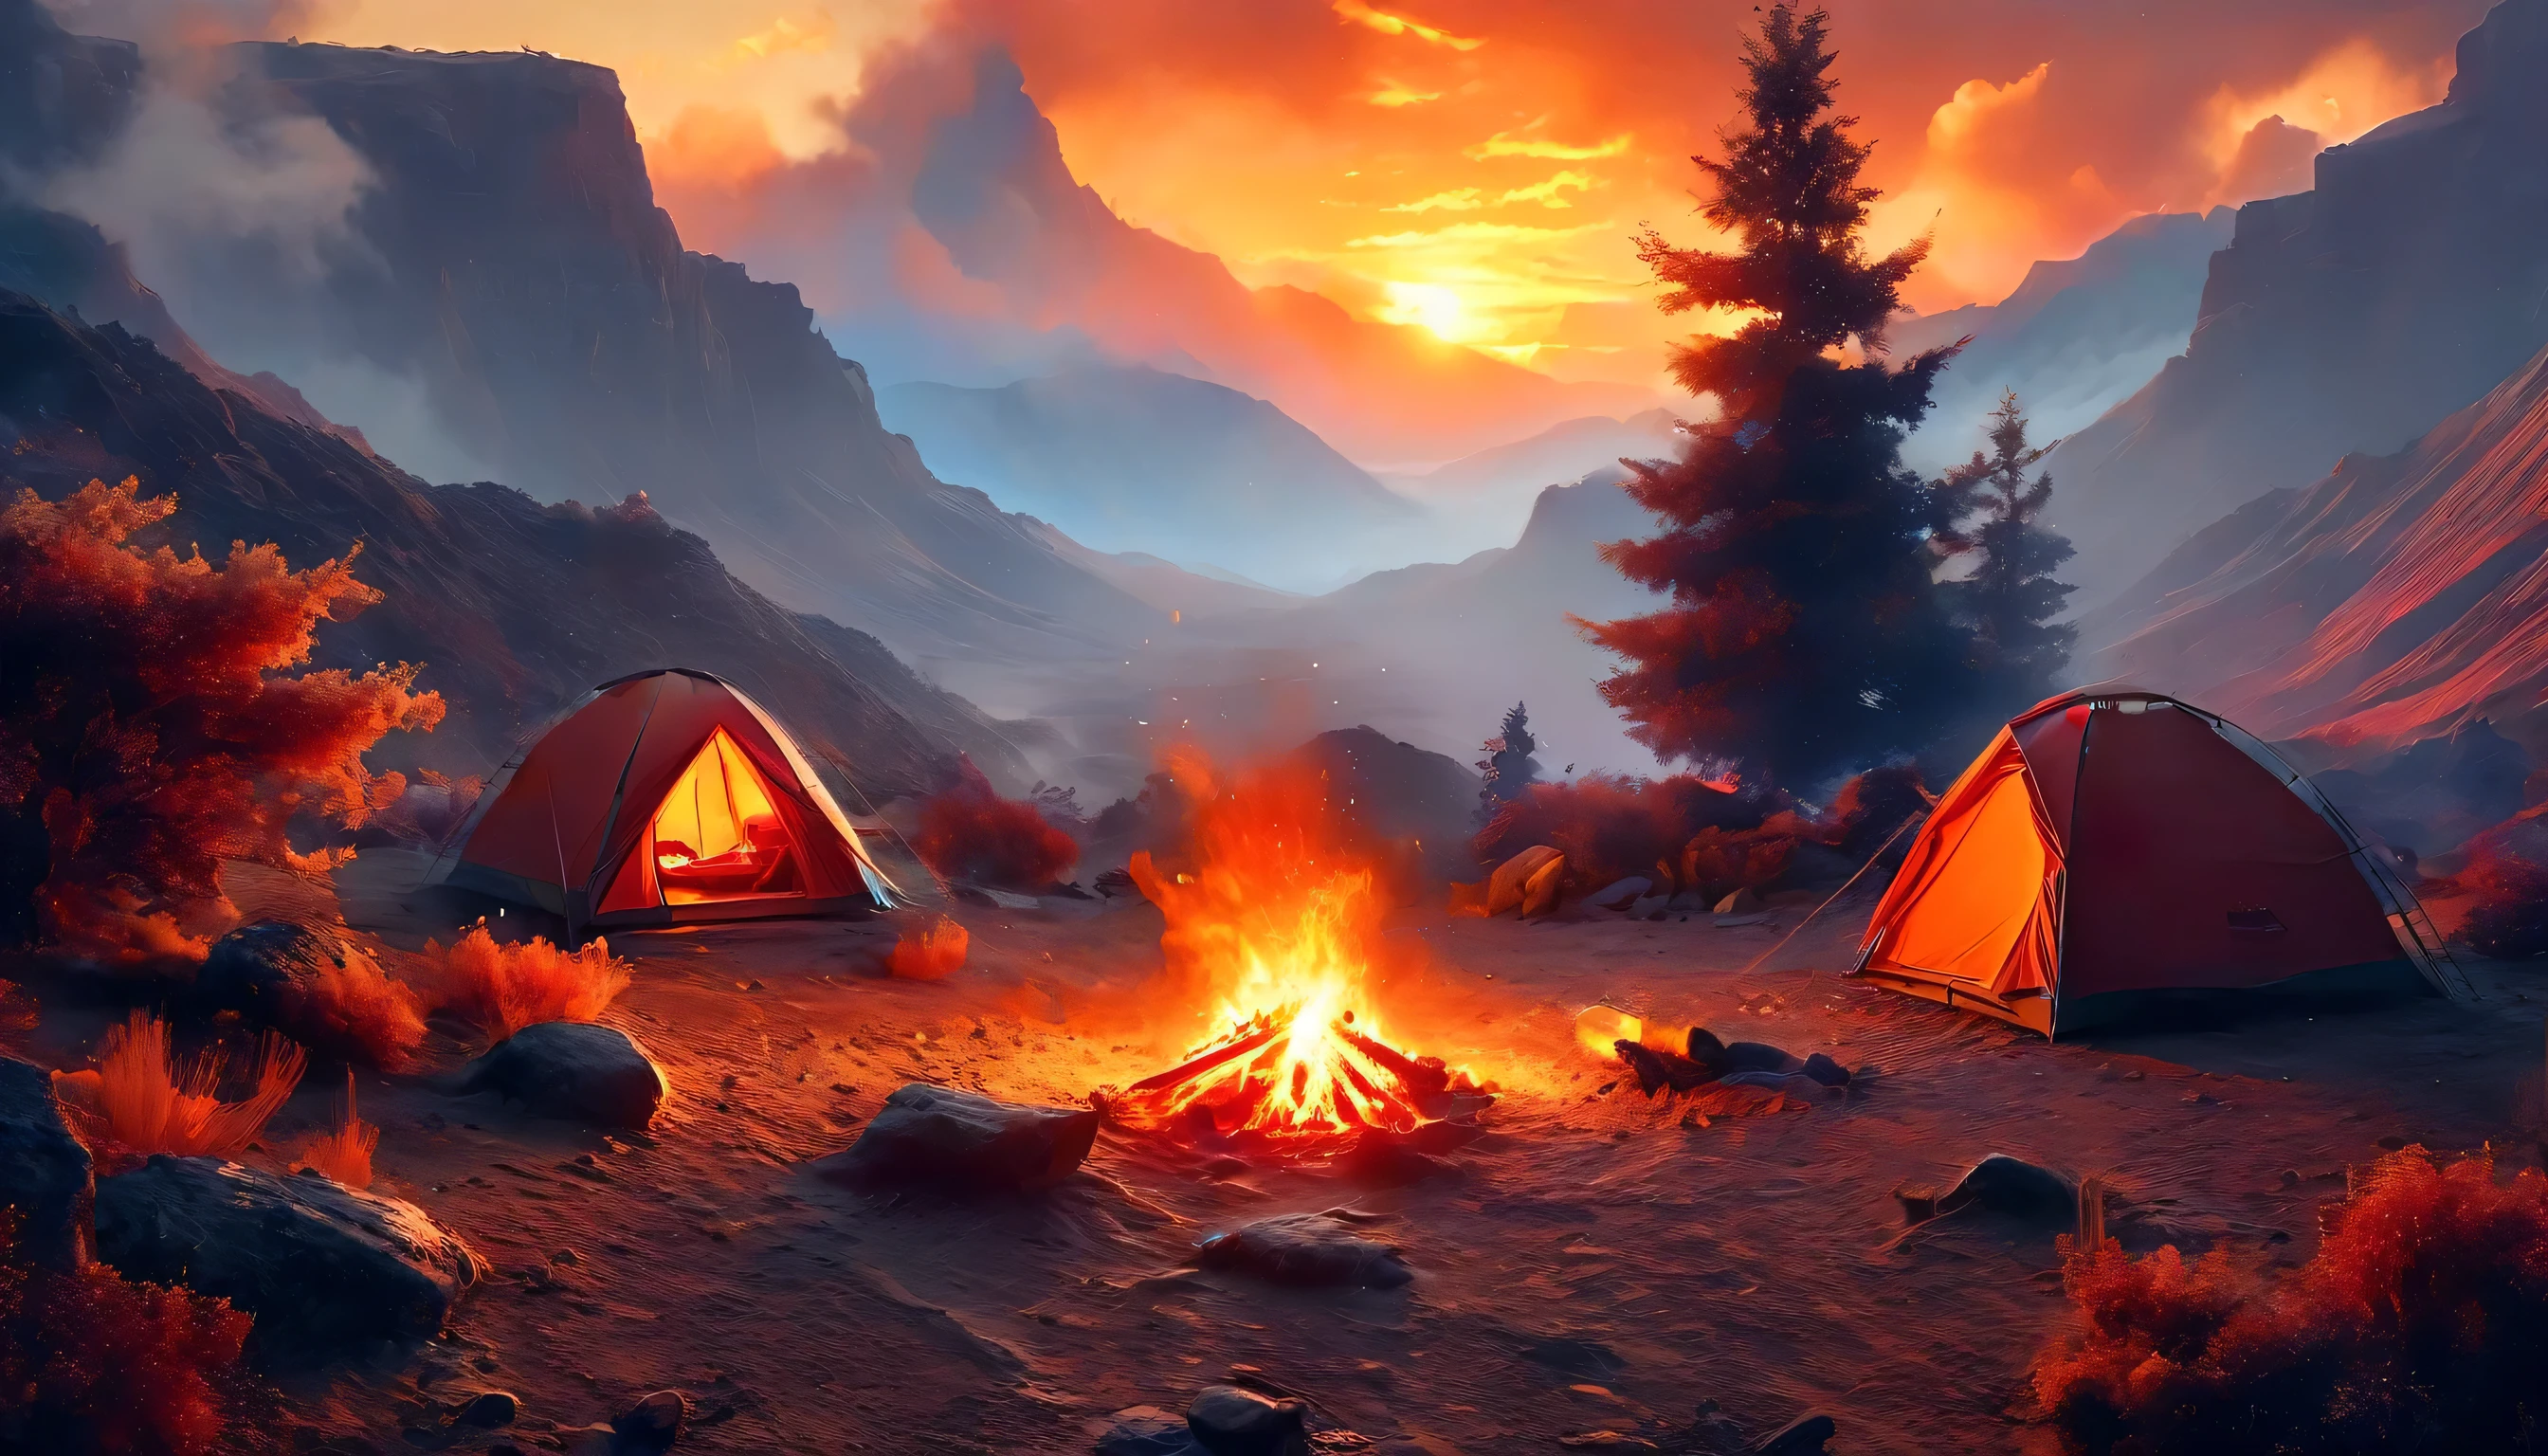 arafed, a picture of a camping (tent: 1.2) and small (campfire: 1.3), on a desert mountaintop, its sunset the sky are in various shades of  (red: 1.1), (orange: 1.1), (azure: 1.1) (purple:1.1) there is smoke rising from the fire camp, there is a magnificent view of the desert canyon and ravines, there is sparce trees on the horizon, it is a time of serenity, peace, and relaxation, best quality, 16K,  photorealism, National Geographic award winning photoshoot, ultra wide shot, RagingNebula, ladyshadow